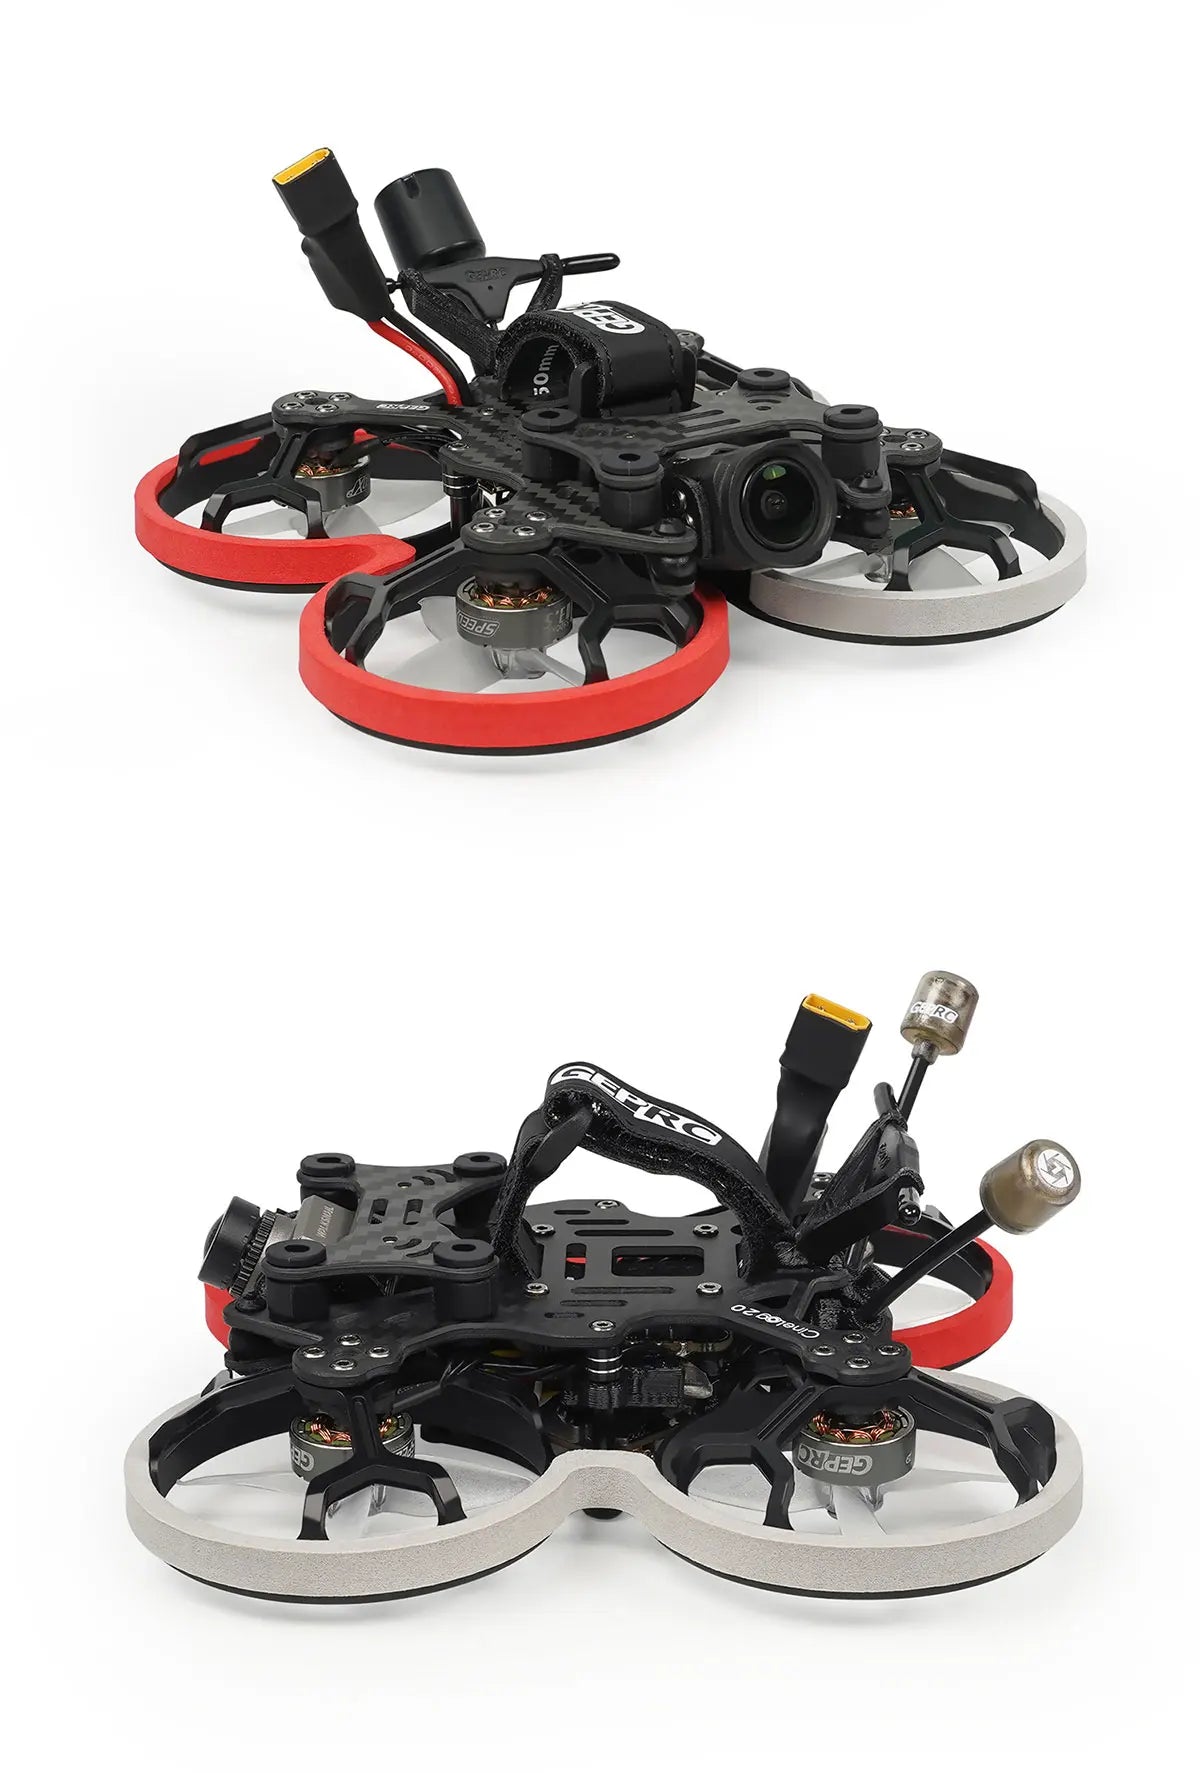 GEPRC Cinelog20 Analog FPV Drone, the CineLog series is designed to effectively eliminate the jello of the image caused by the